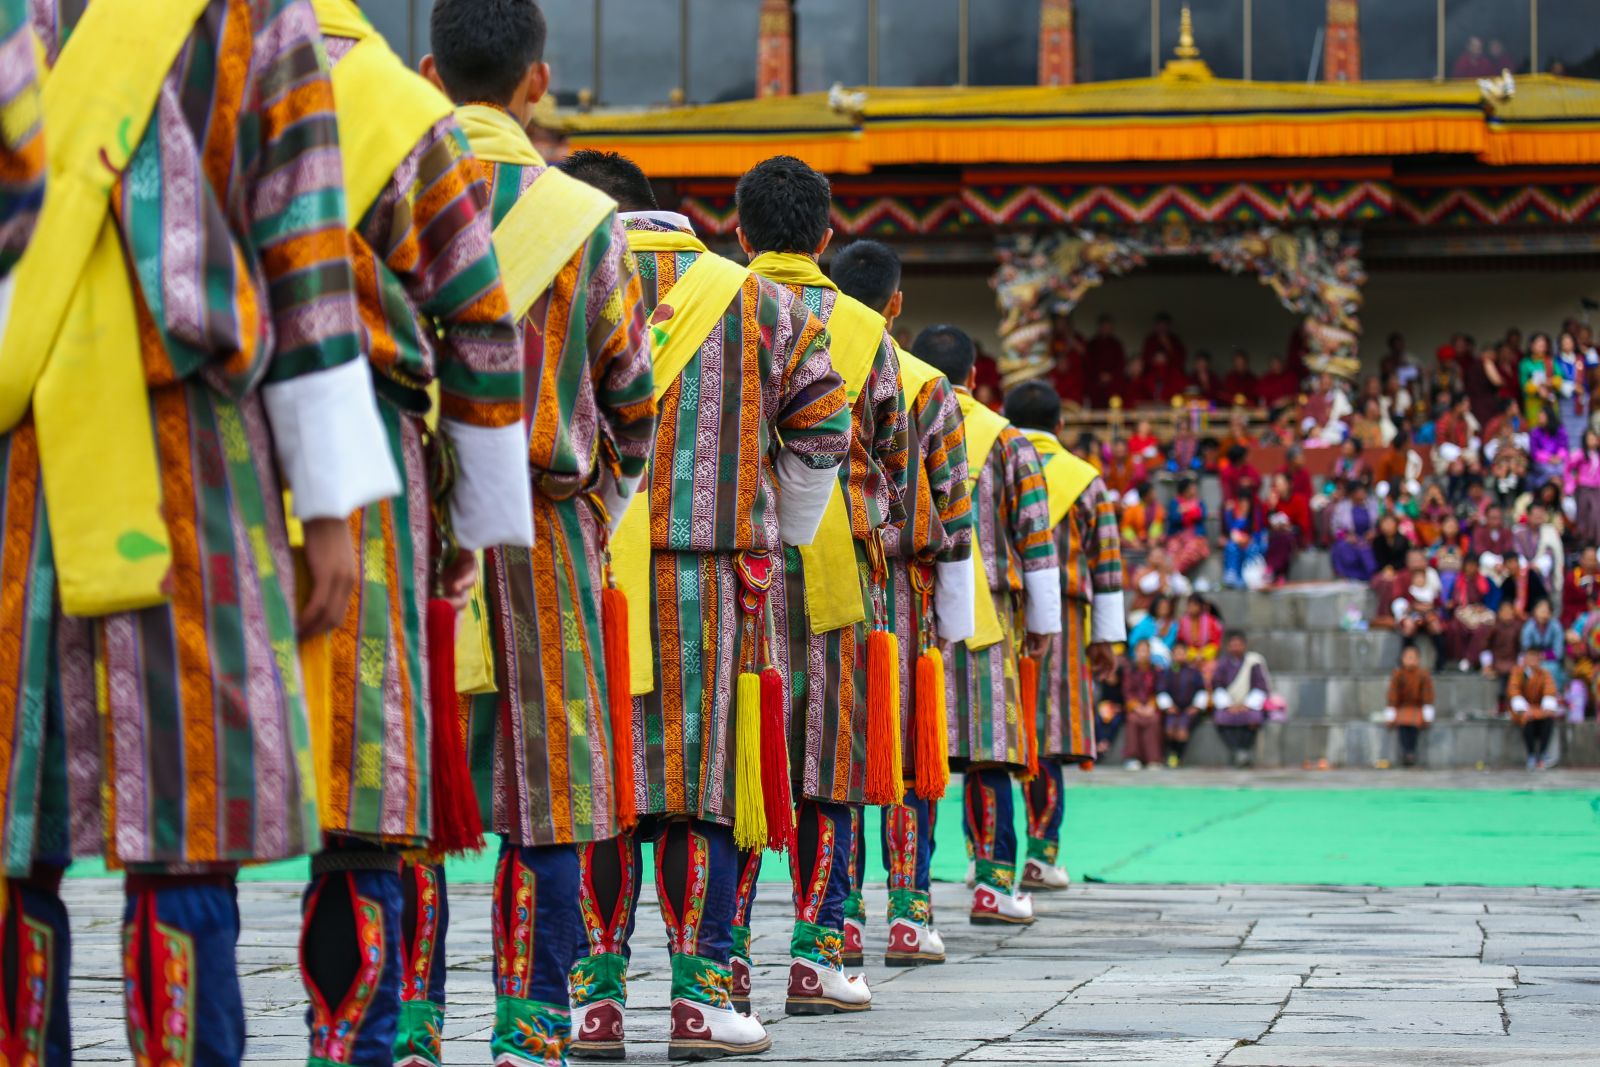 Men in traitional dress at a colourful ceremony in Thimphu Bhutan